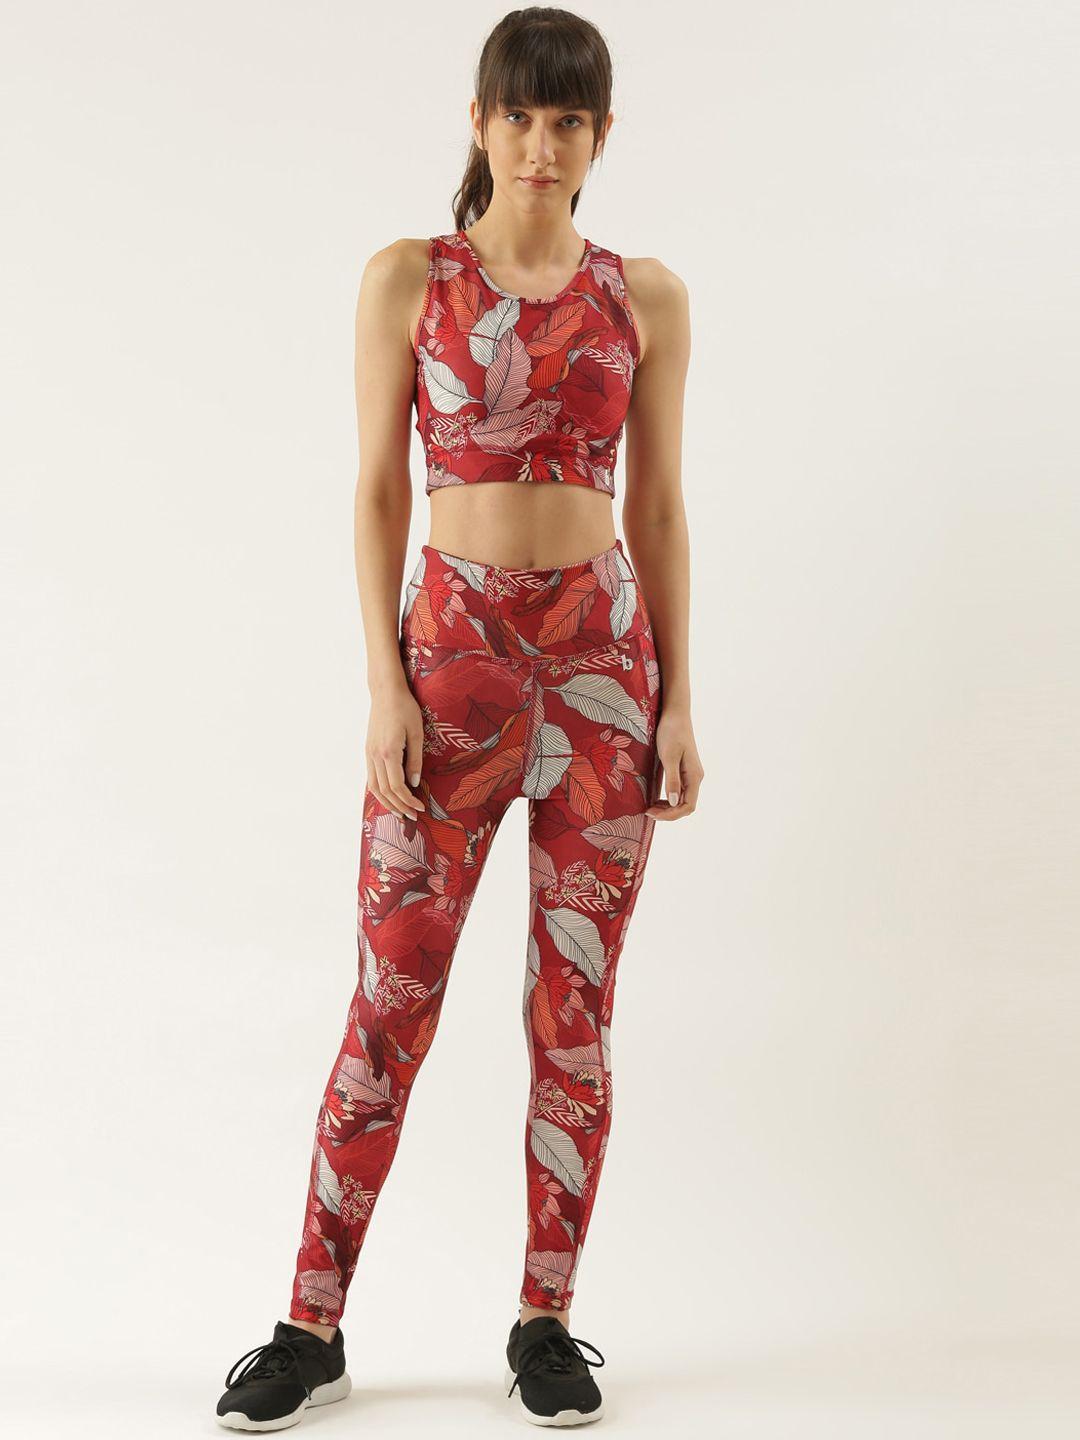 bannos swagger women red & white tropical printed sport bra & tights set